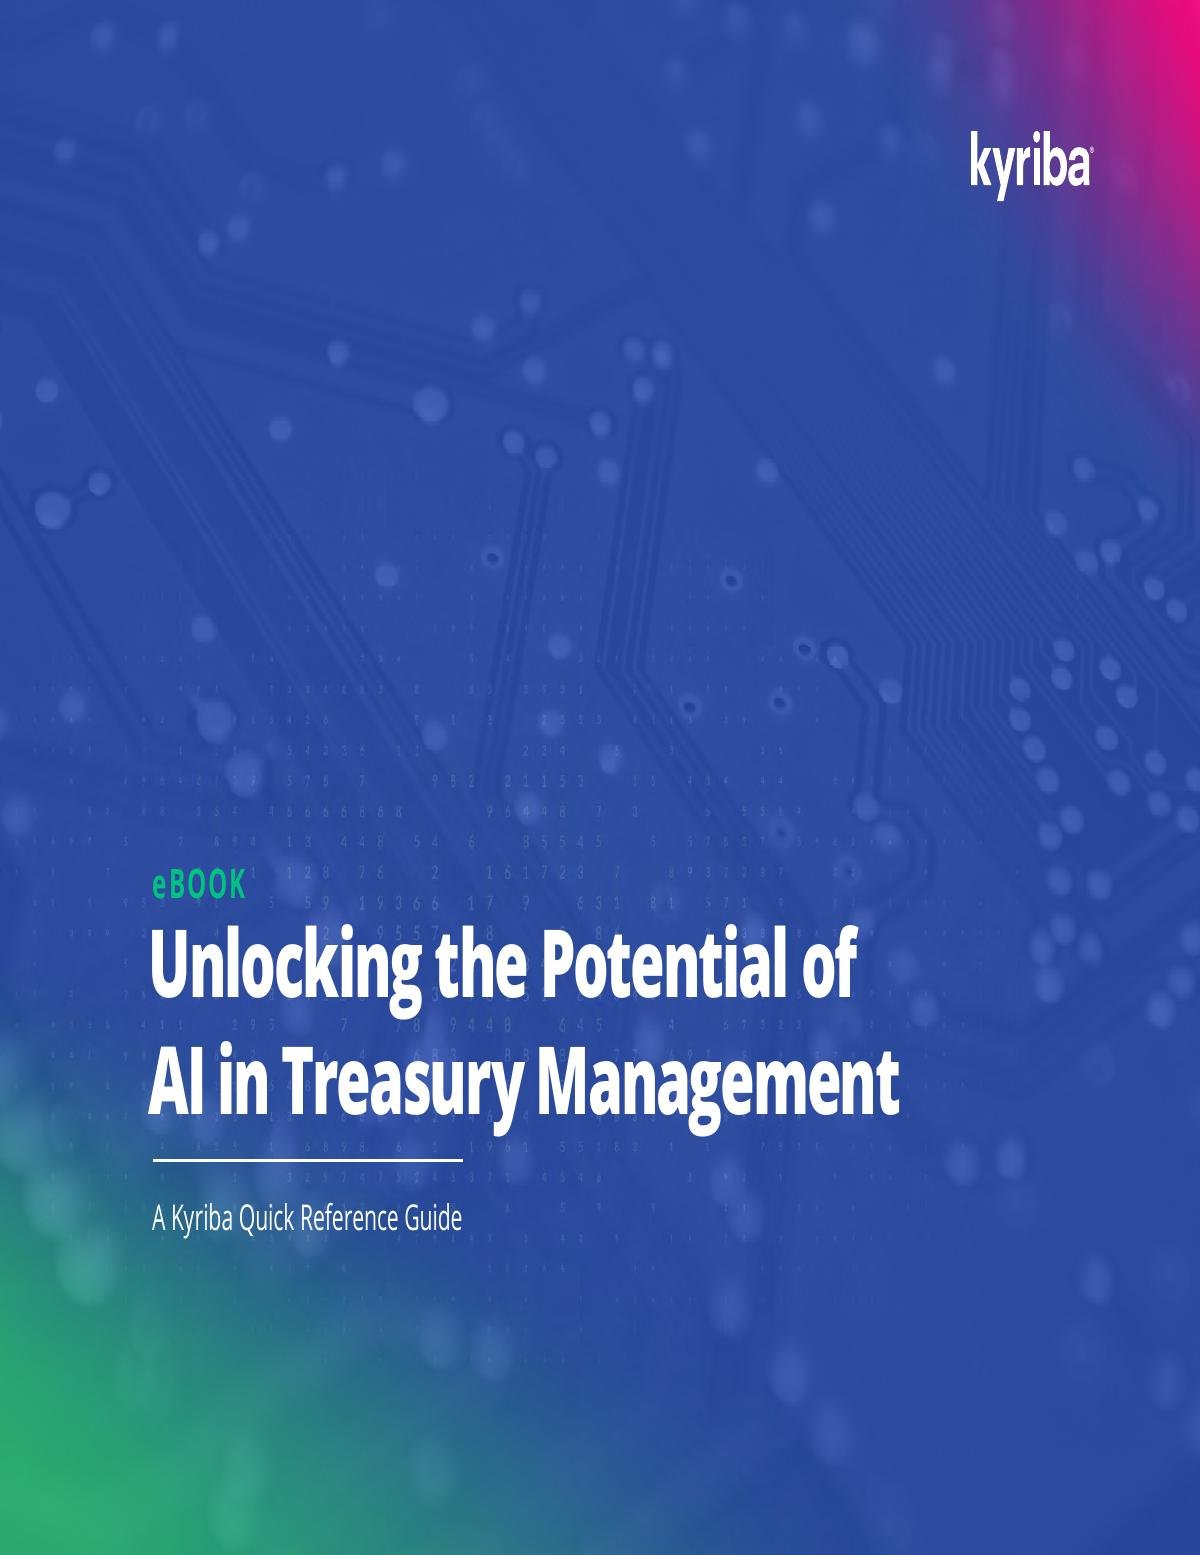 Unlocking the Potential of AI in Treasury Management